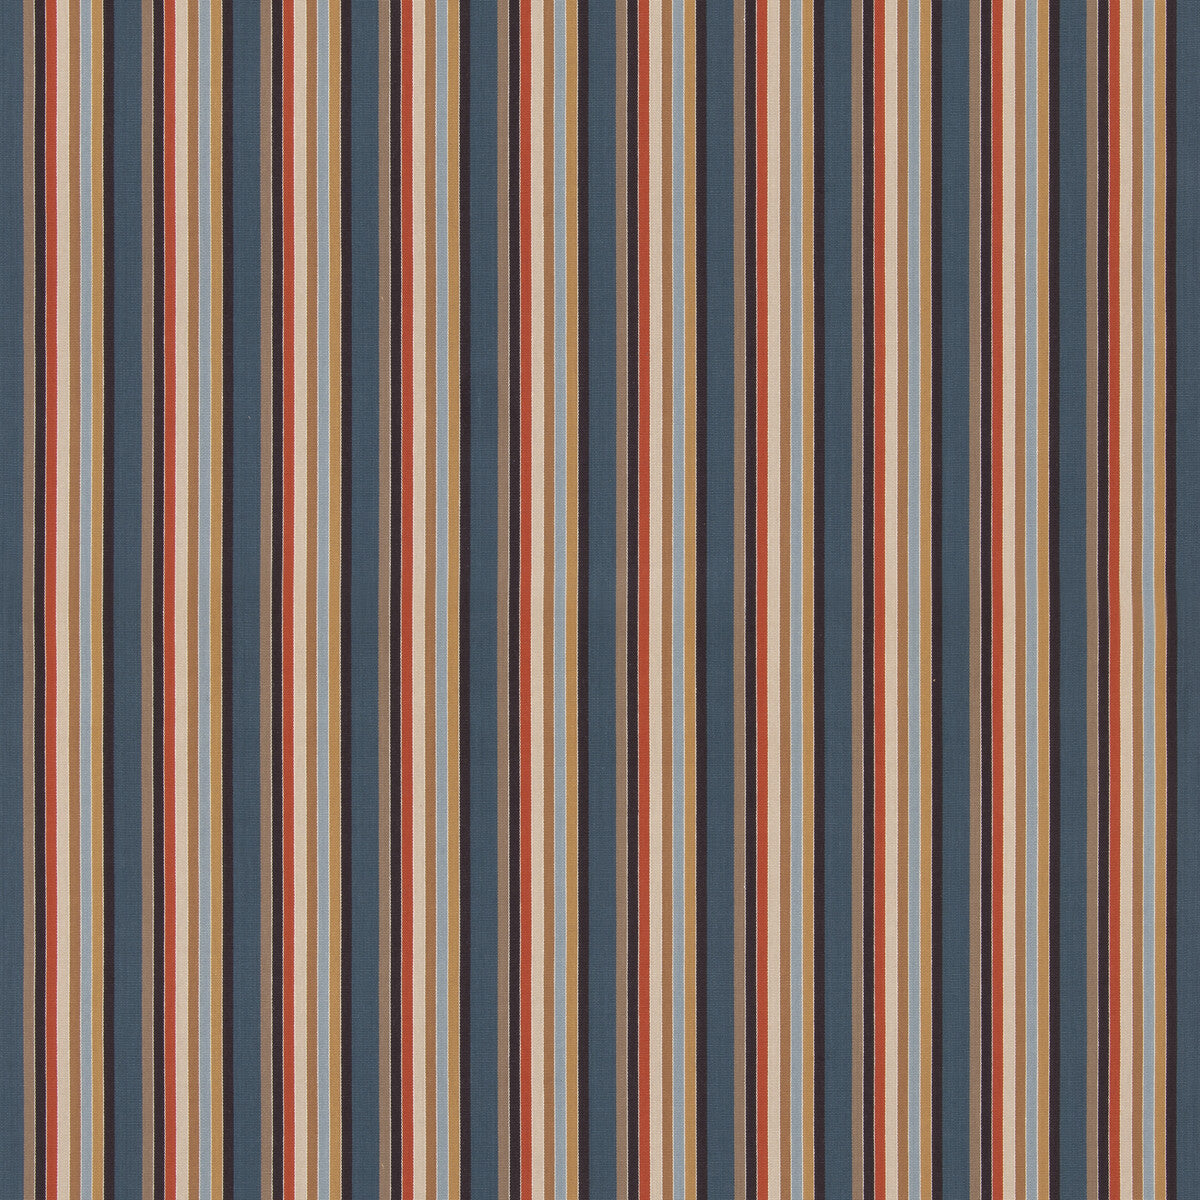 Wild One fabric in indigo/cocoa color - pattern BF11063.2.0 - by G P &amp; J Baker in the X Kit Kemp Stripes collection